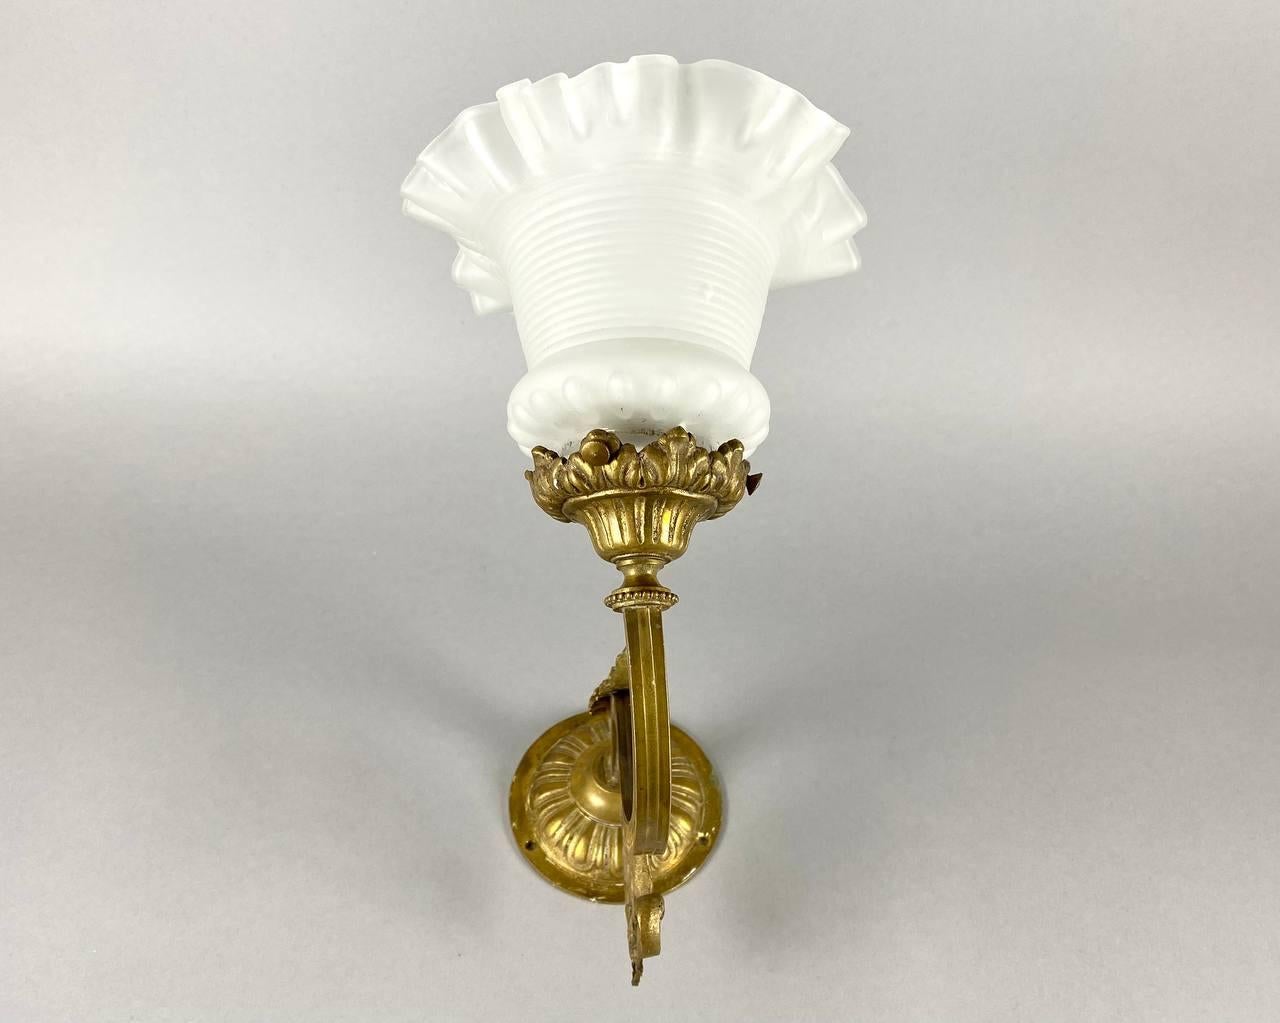 Charming Antique Wall Sconce Wall Sconce in Bronze, with Glass Shade, 1920 For Sale 2